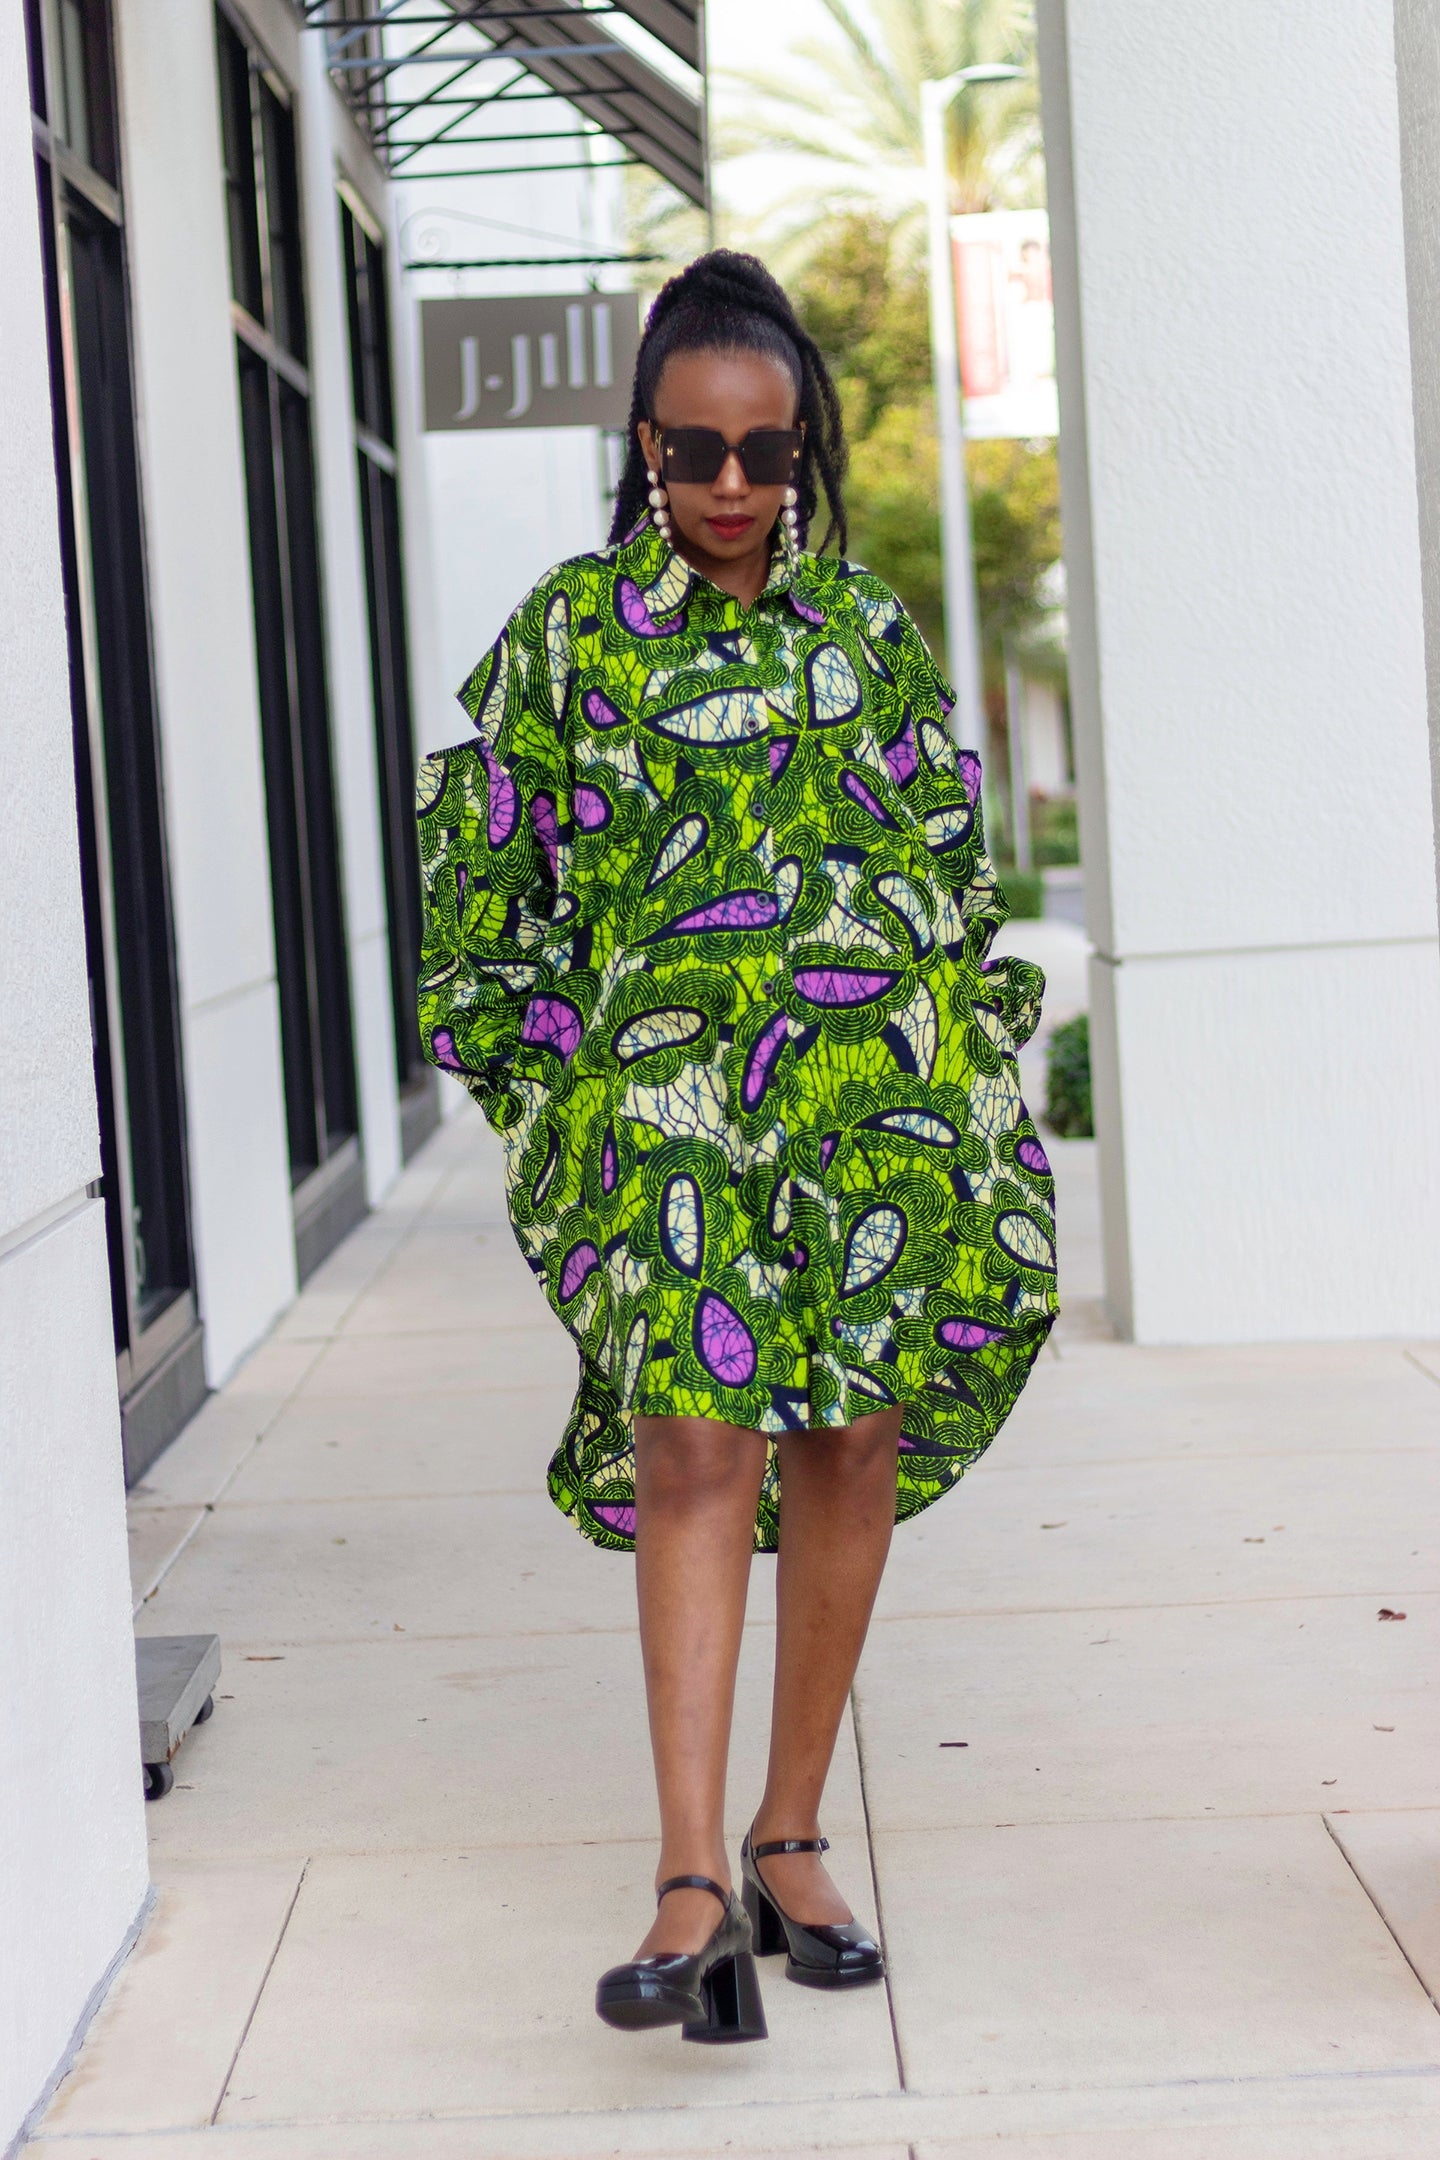 African Print/Ankara/Kitenge High-Low Oversized Shirt with Drop Sleeves and Pockets - Green/Purple/Cream White  and Black motif Print